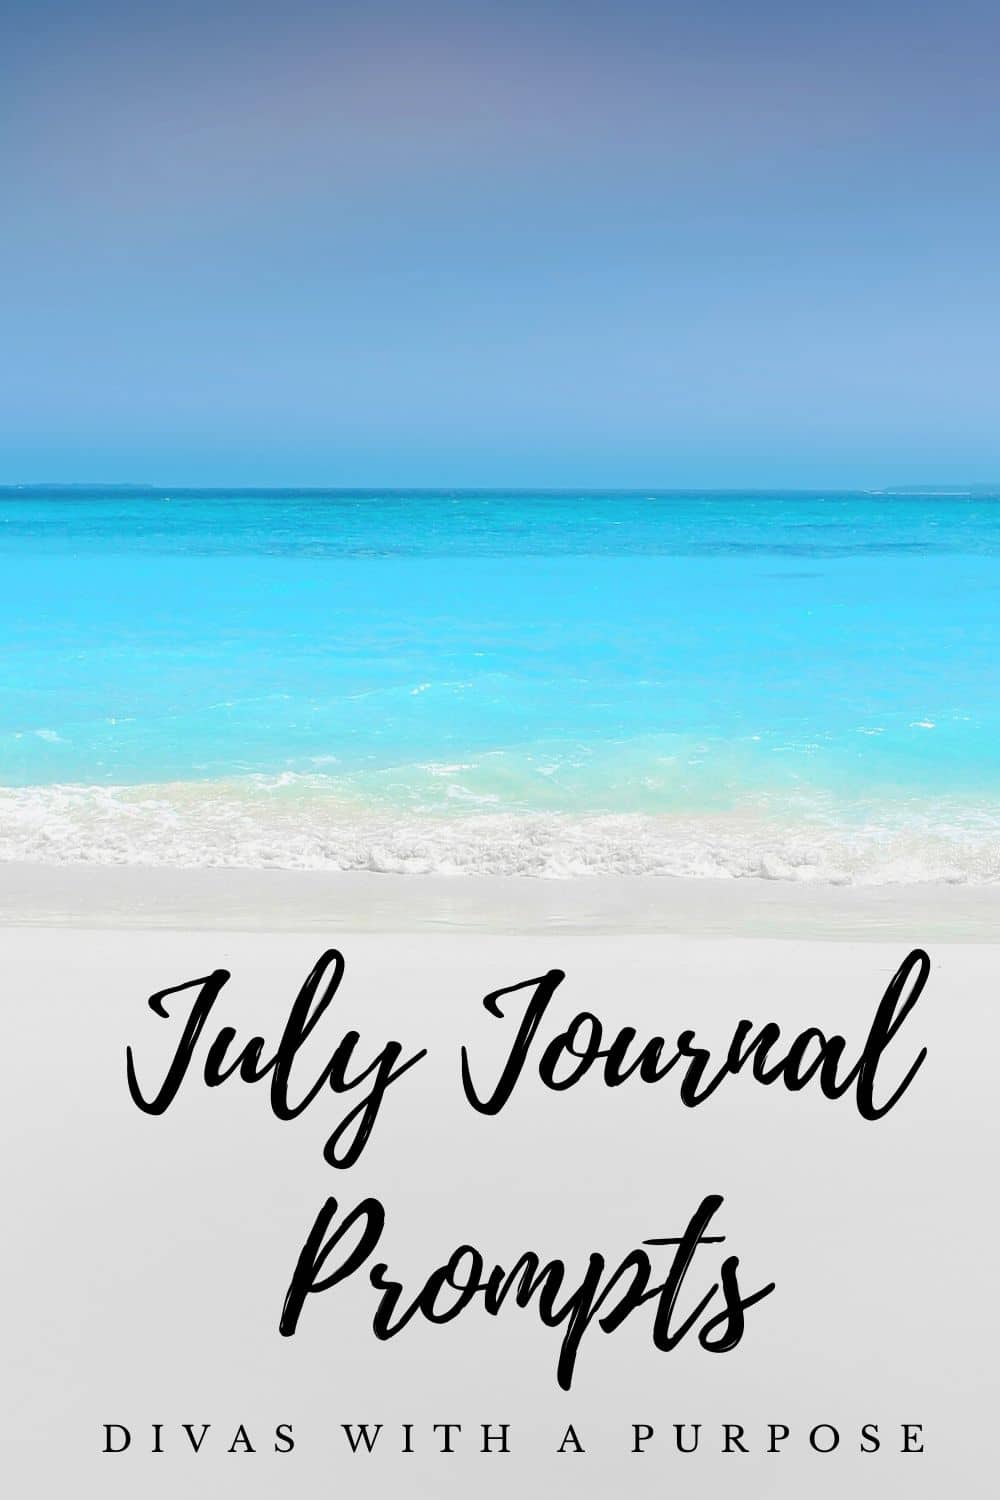 Here is a listing of July journal prompts you can use this month in your journaling projects, live-streams, social media posts or to spark conversations.